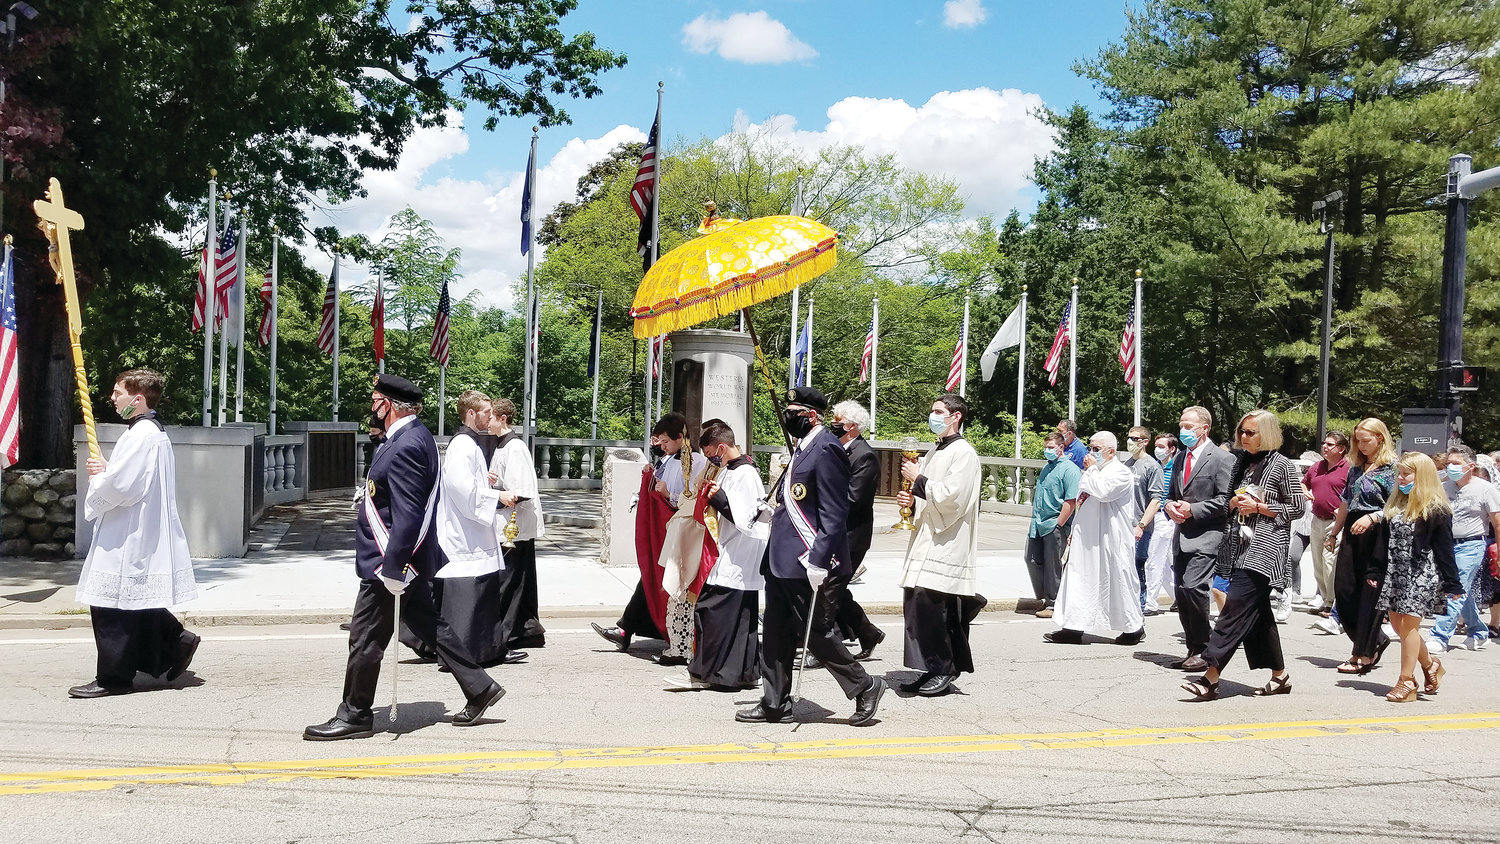 Parishioners of Immaculate Conception Parish and St. Pius X Parish in Westerly take part in the 15th annual Eucharistic Procession to celebrate the Feast of Corpus Christi, June 14.